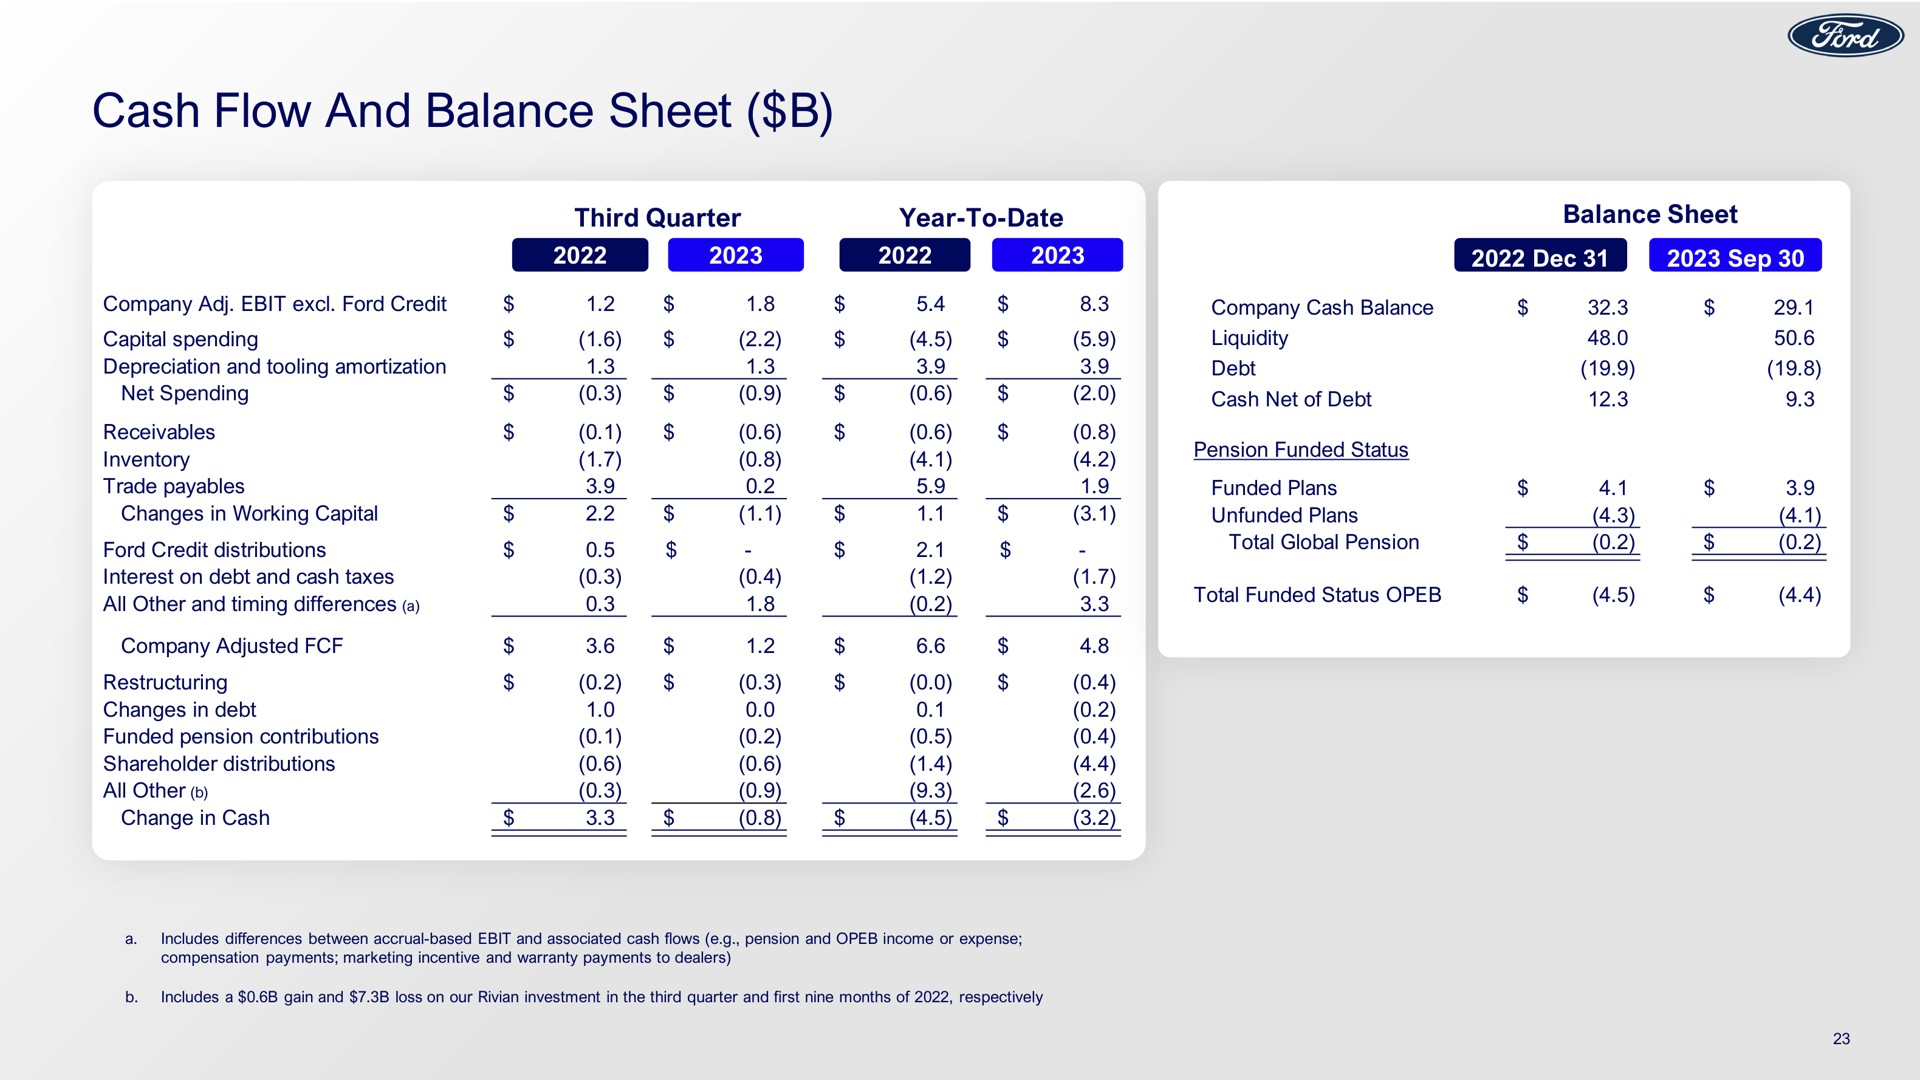 cash flow and balance sheet | Ford